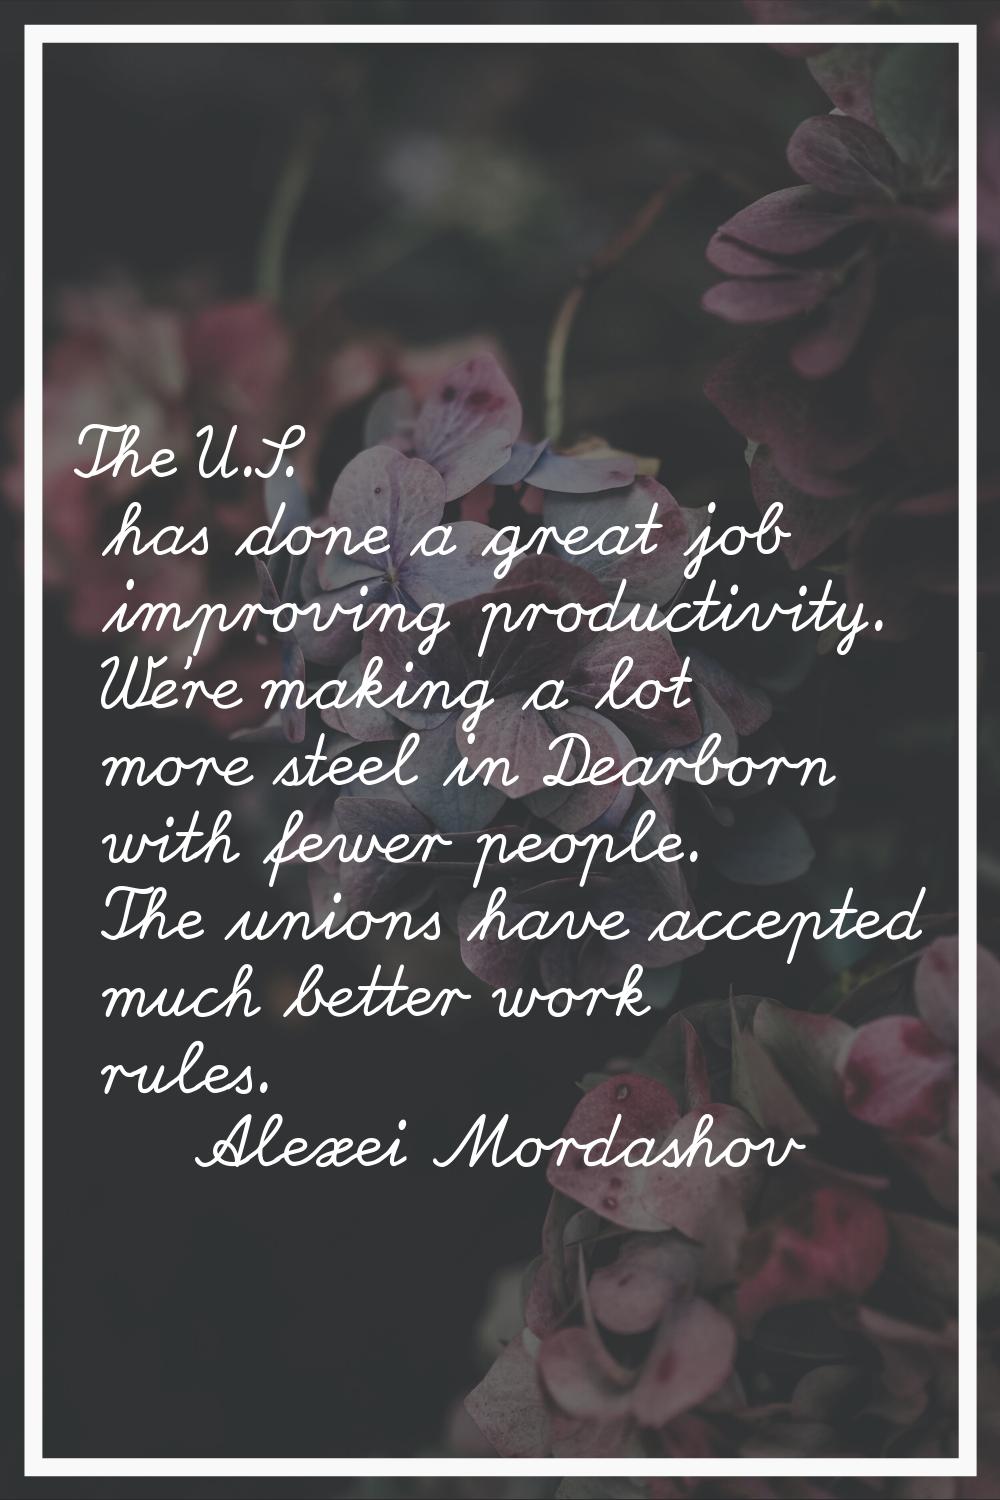 The U.S. has done a great job improving productivity. We're making a lot more steel in Dearborn wit